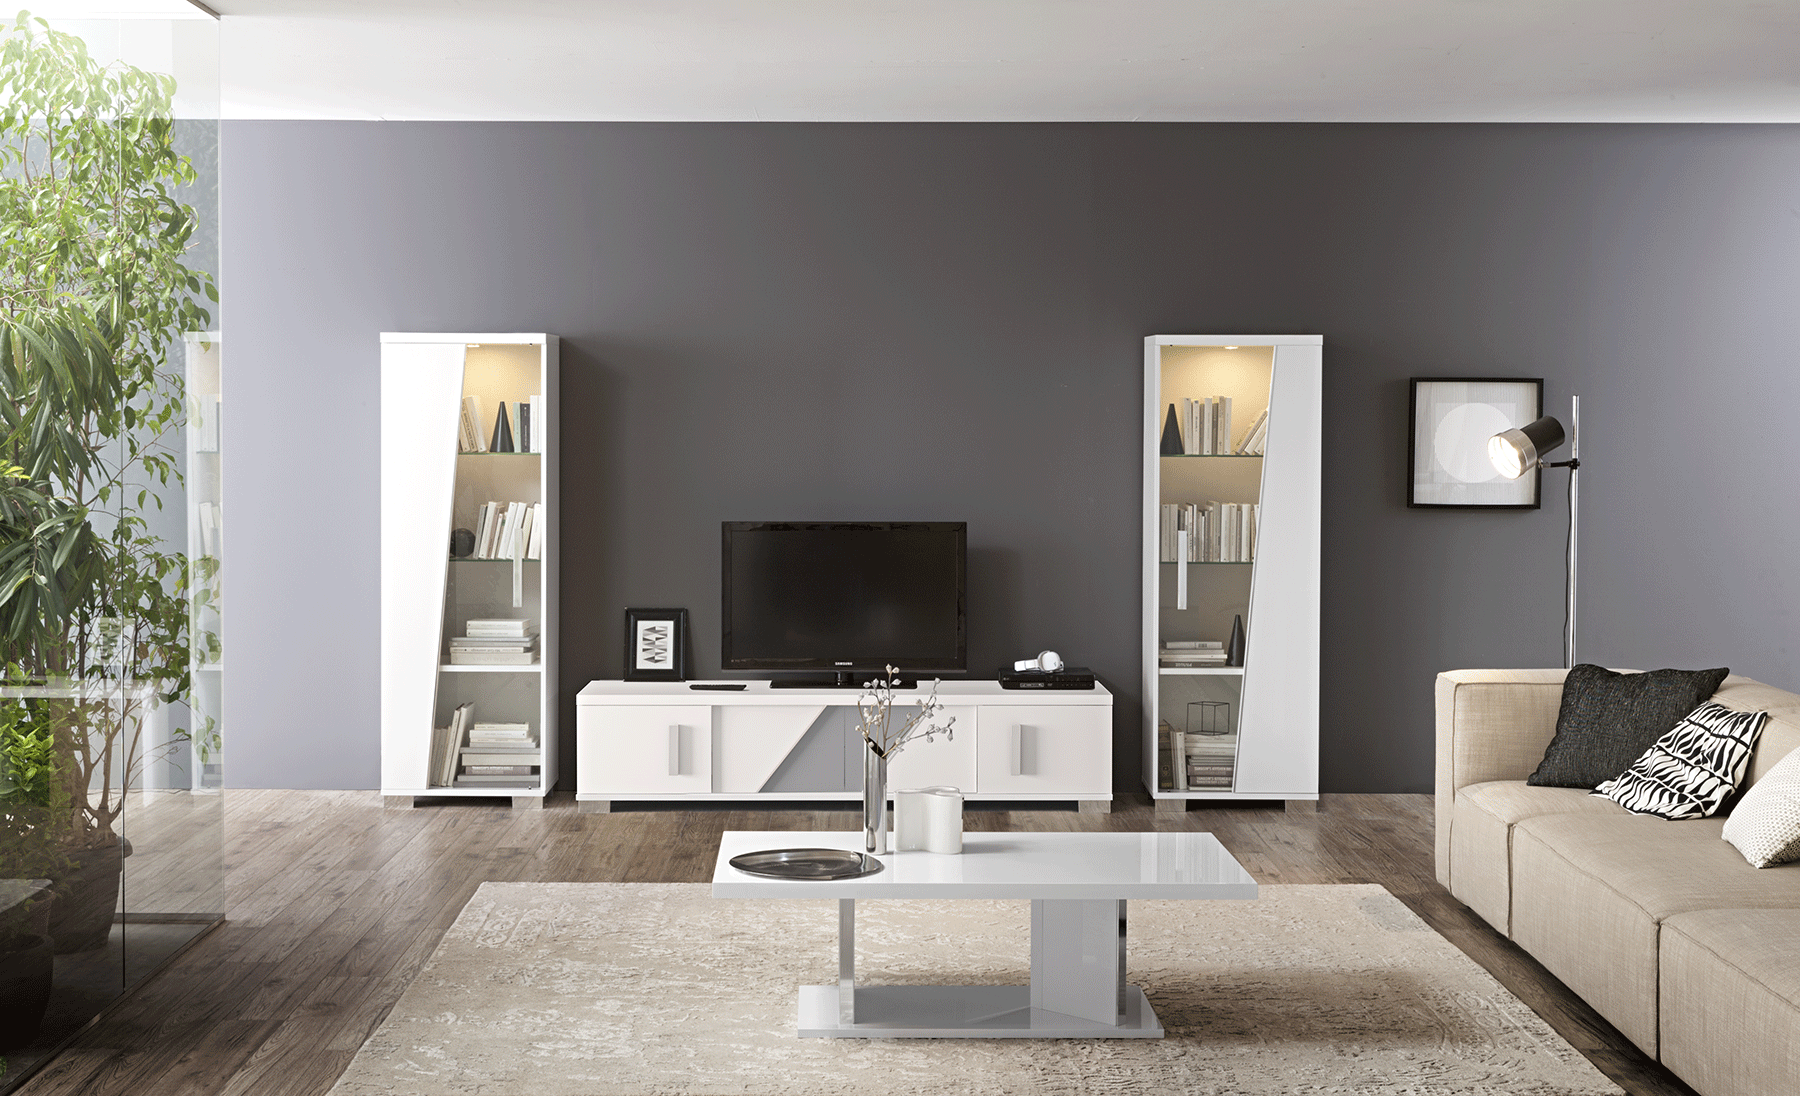 Wallunits Hallway Console tables and Mirrors Lisa Additional Items, Italy